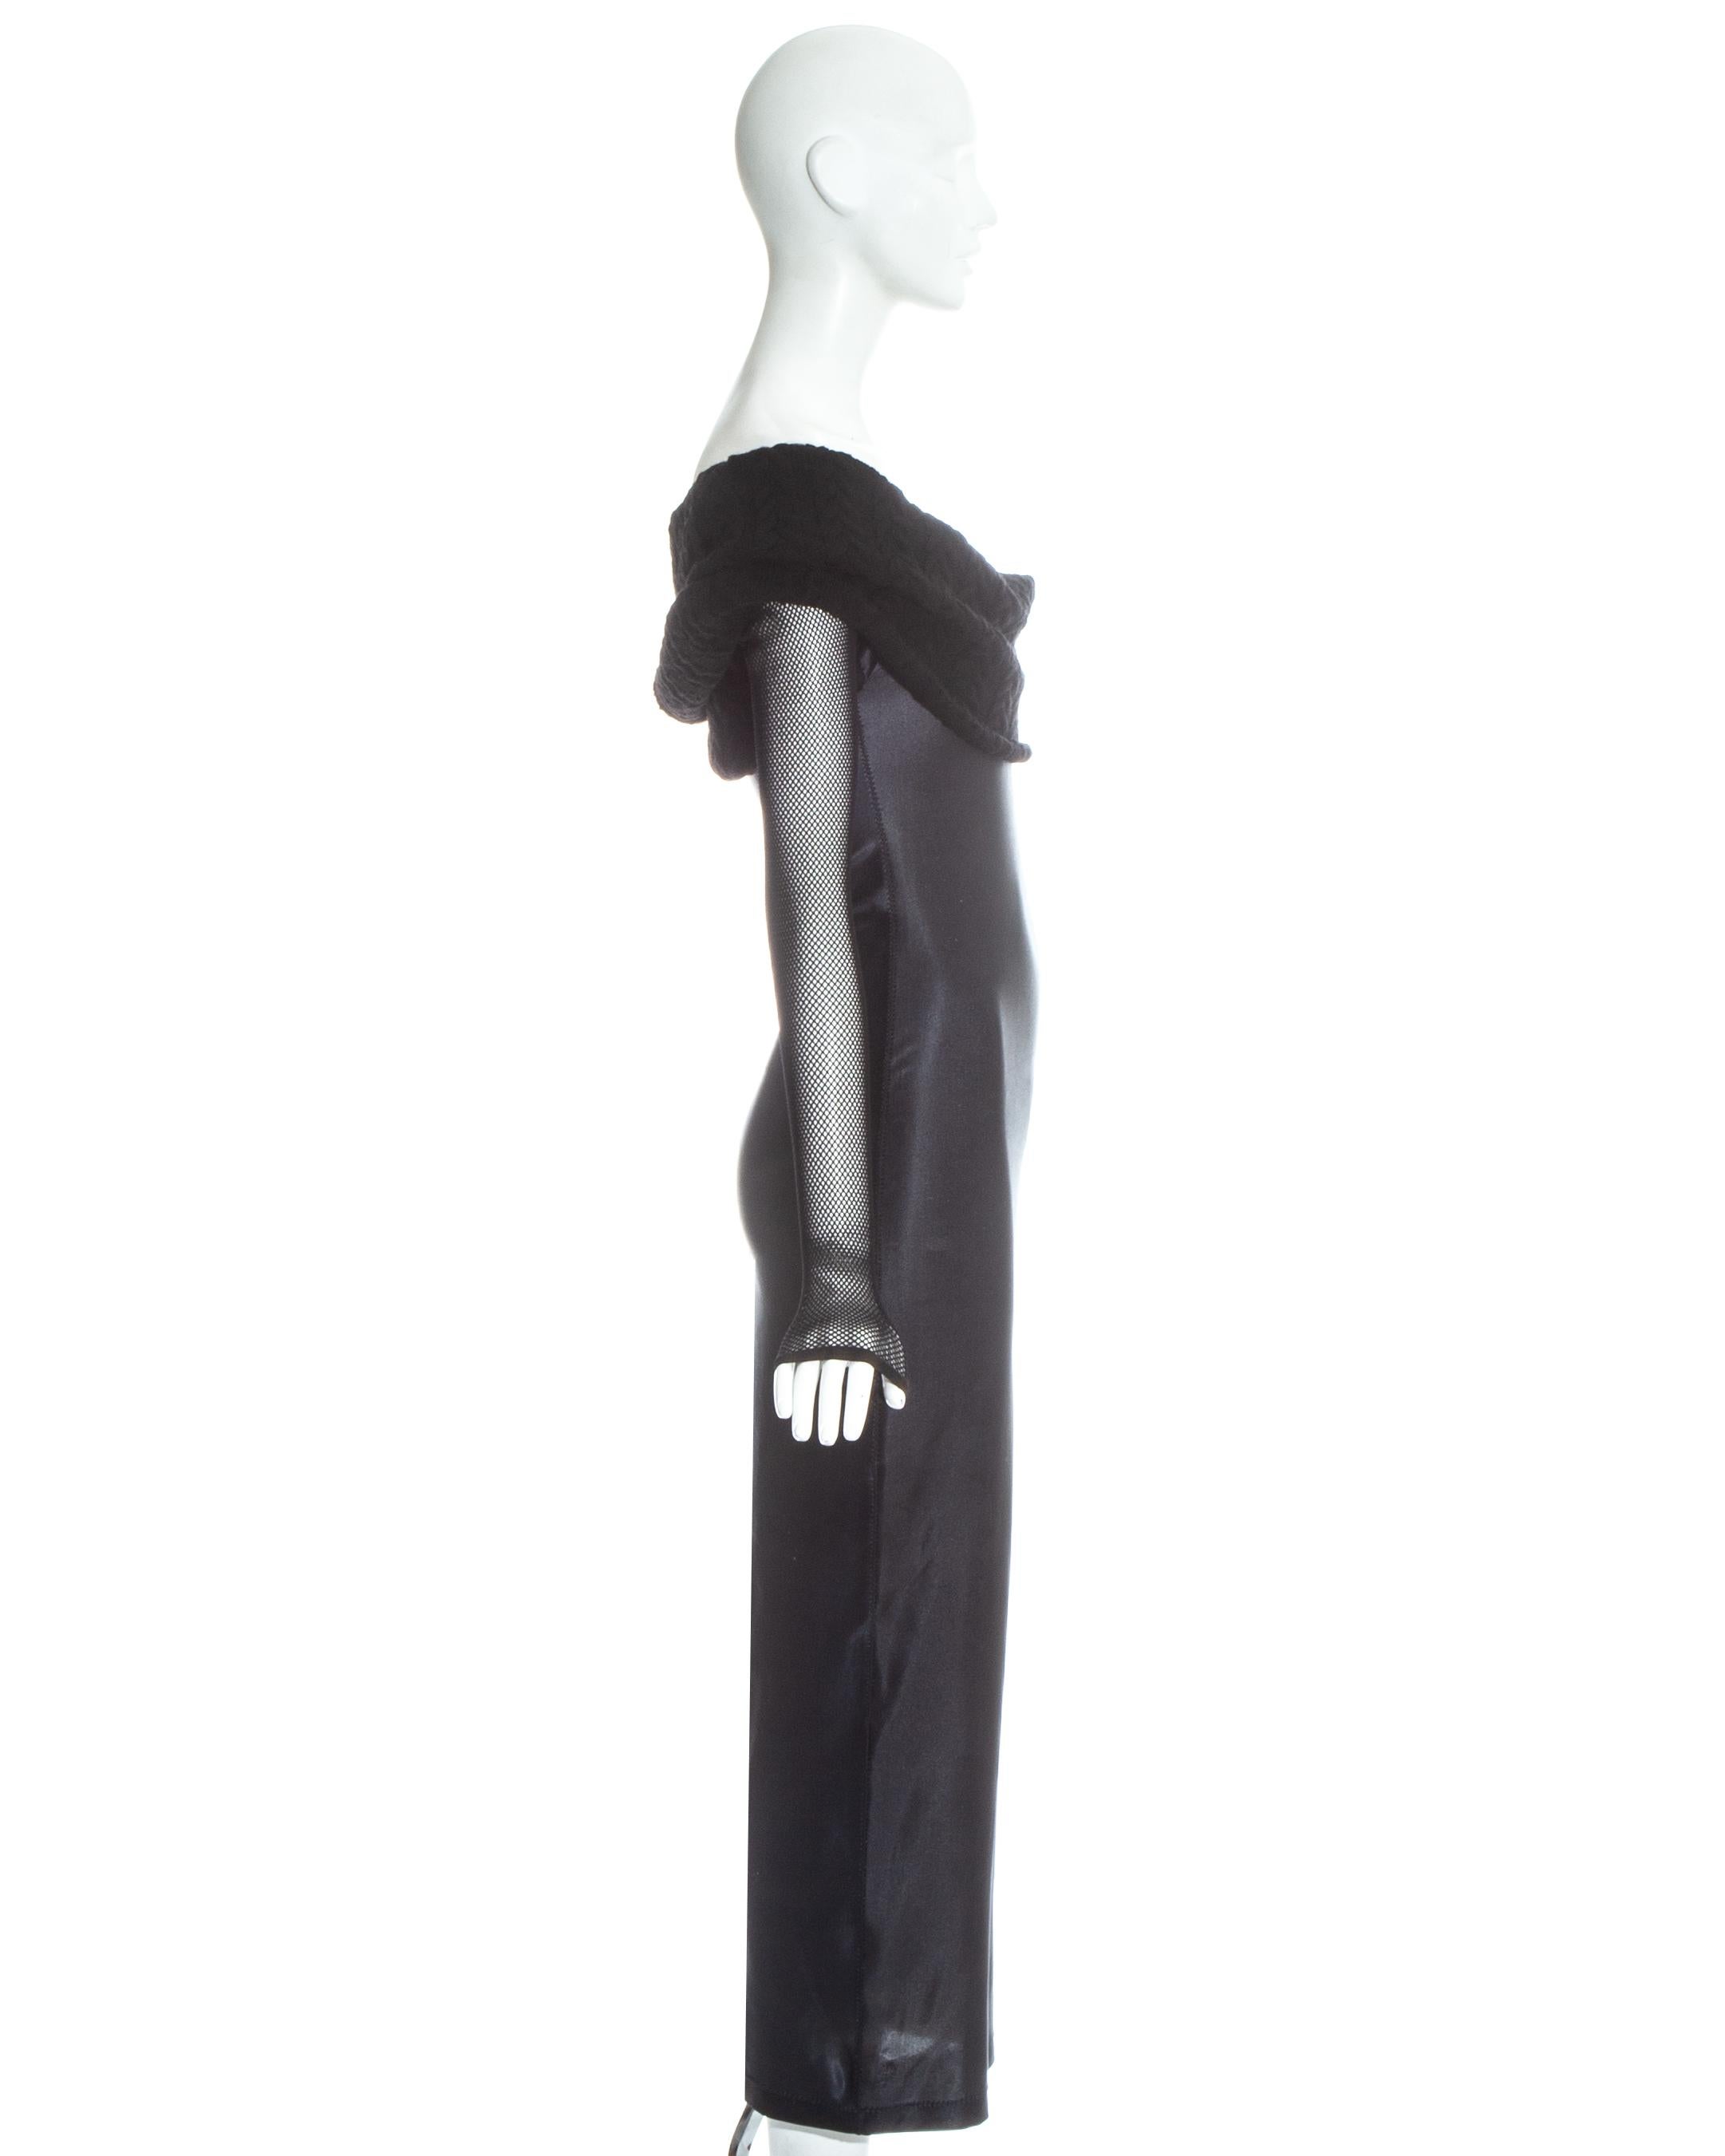 Black Jean Paul Gaultier Equator black maxi dress with knitted shawl collar, c. 1980s